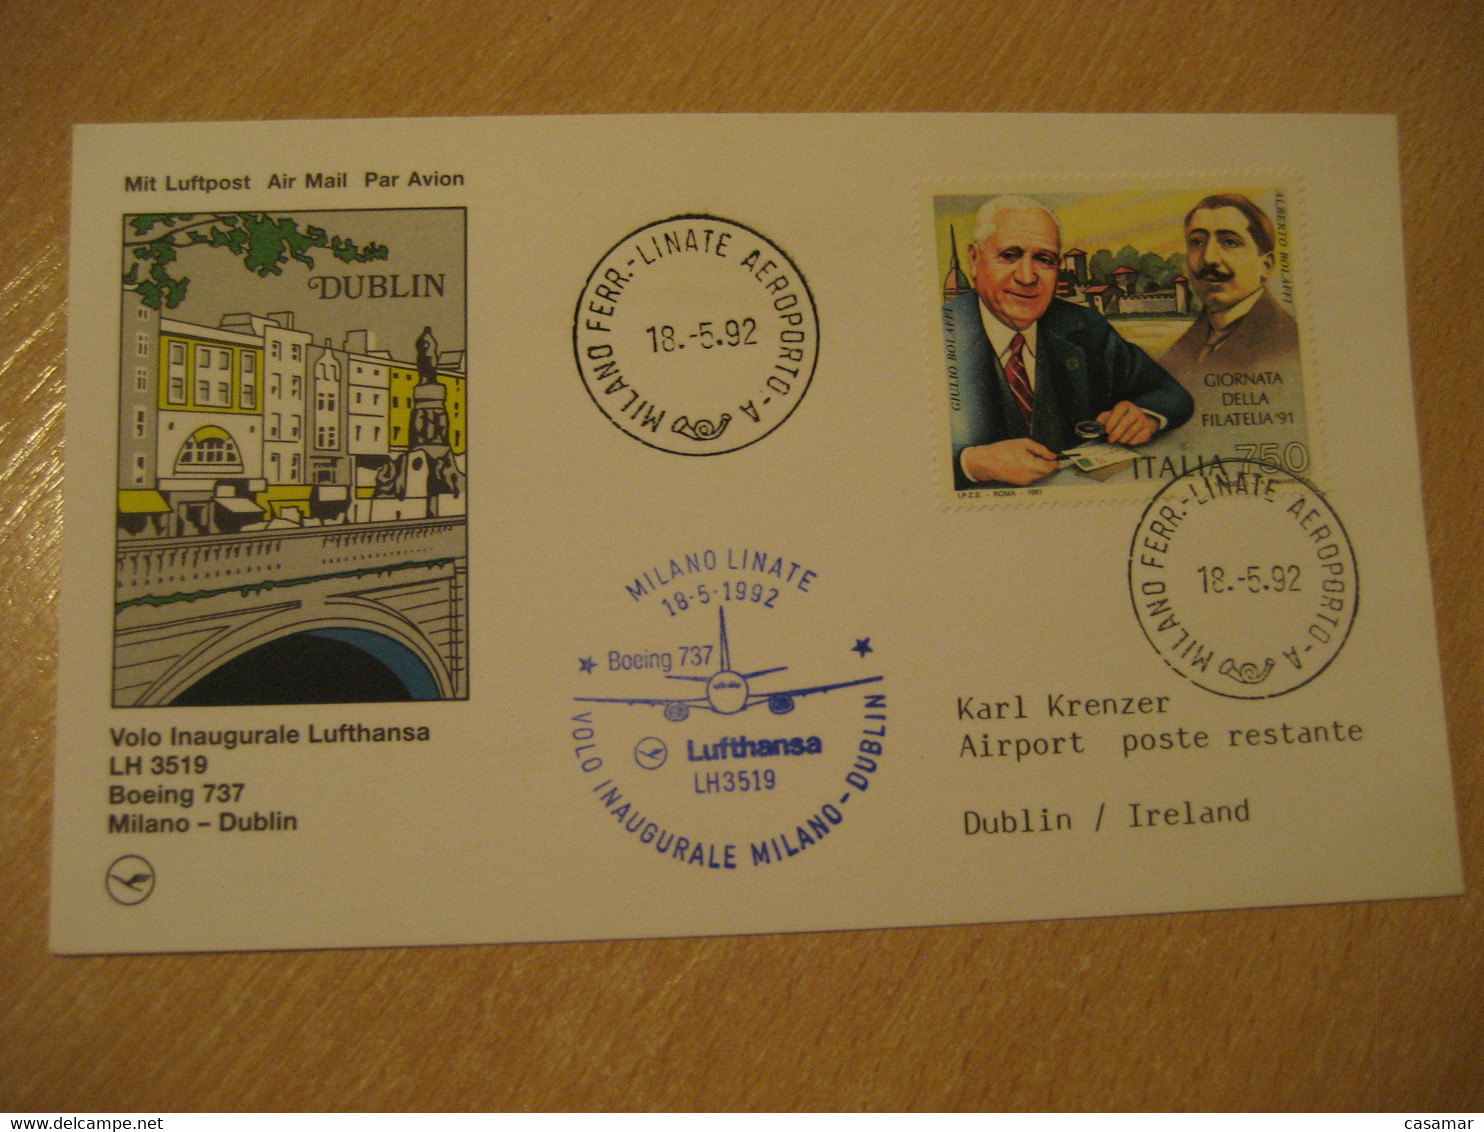 DUBLIN Milan 1992 Lufthansa Airlines Airline Boeing 737 First Flight Blue Cancel Card IRELAND ITALY GERMANY - Airmail